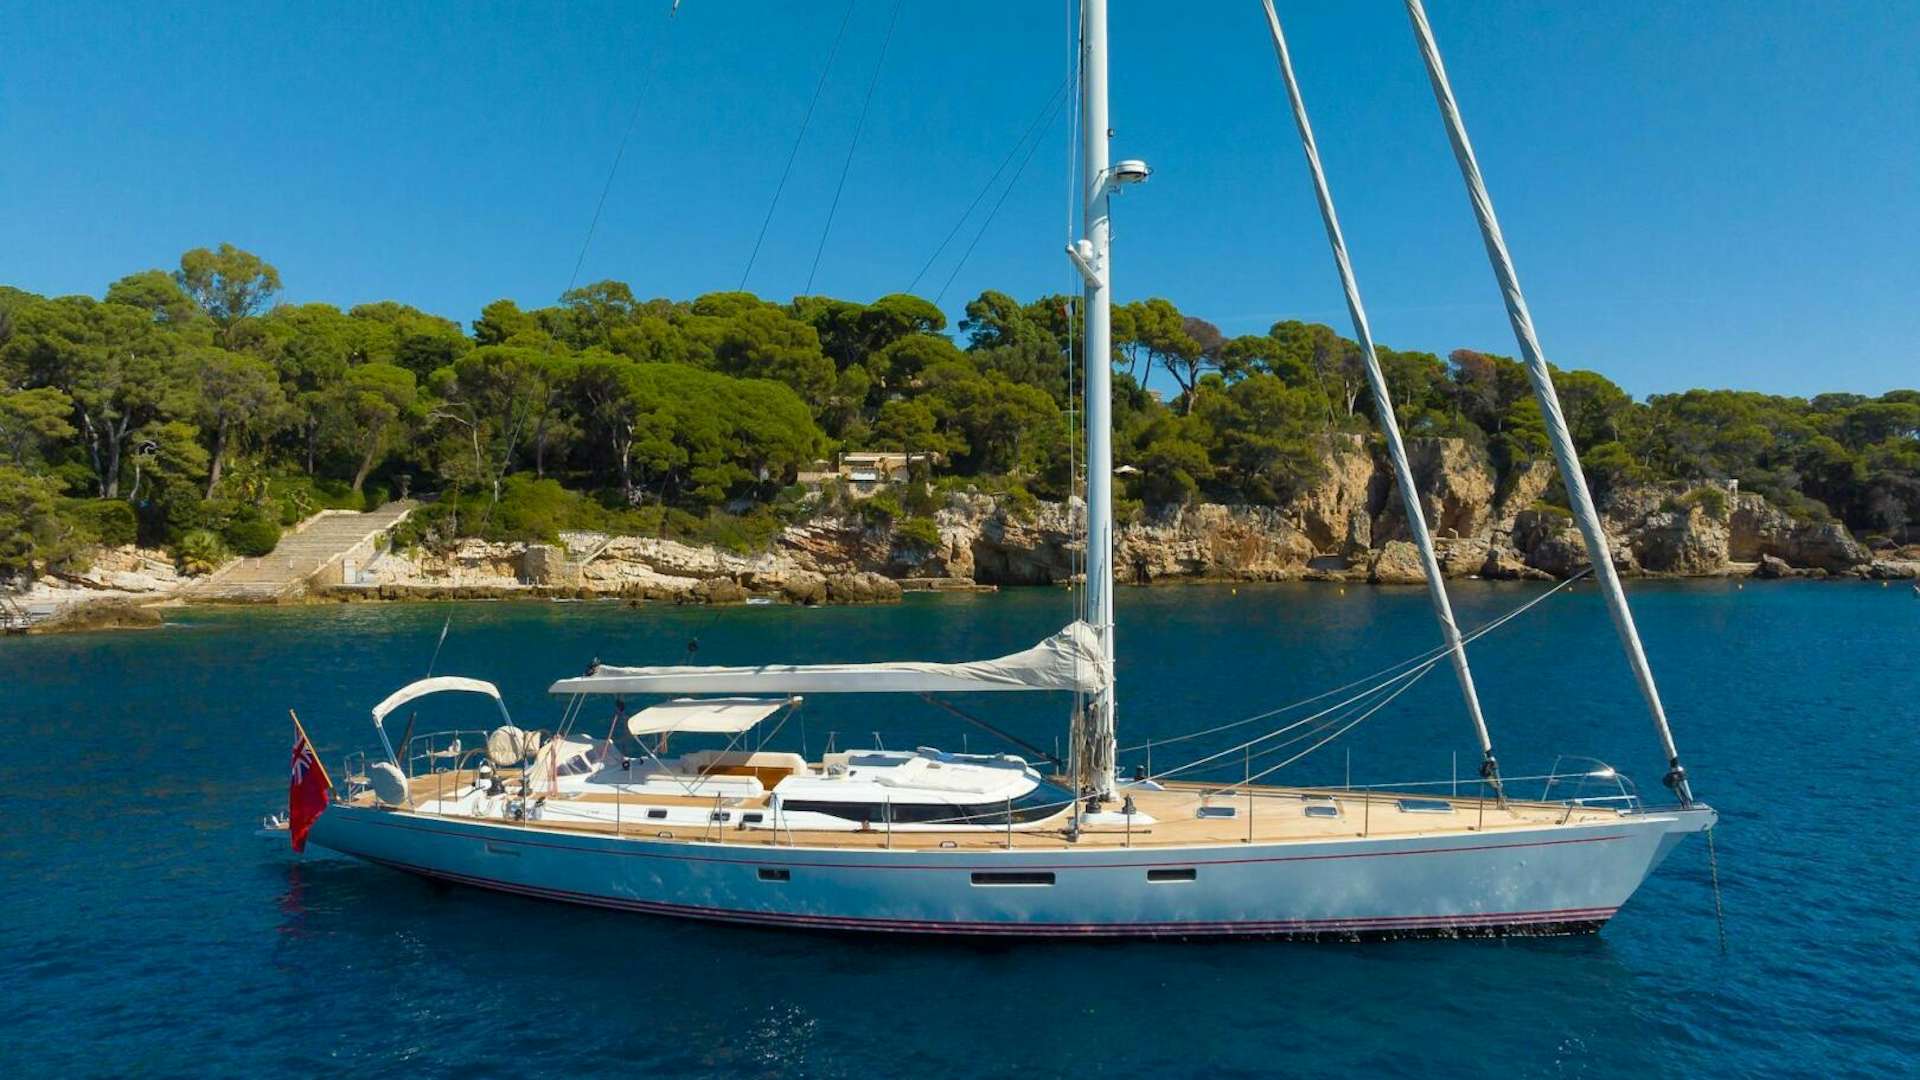 Hanno
Yacht for Sale